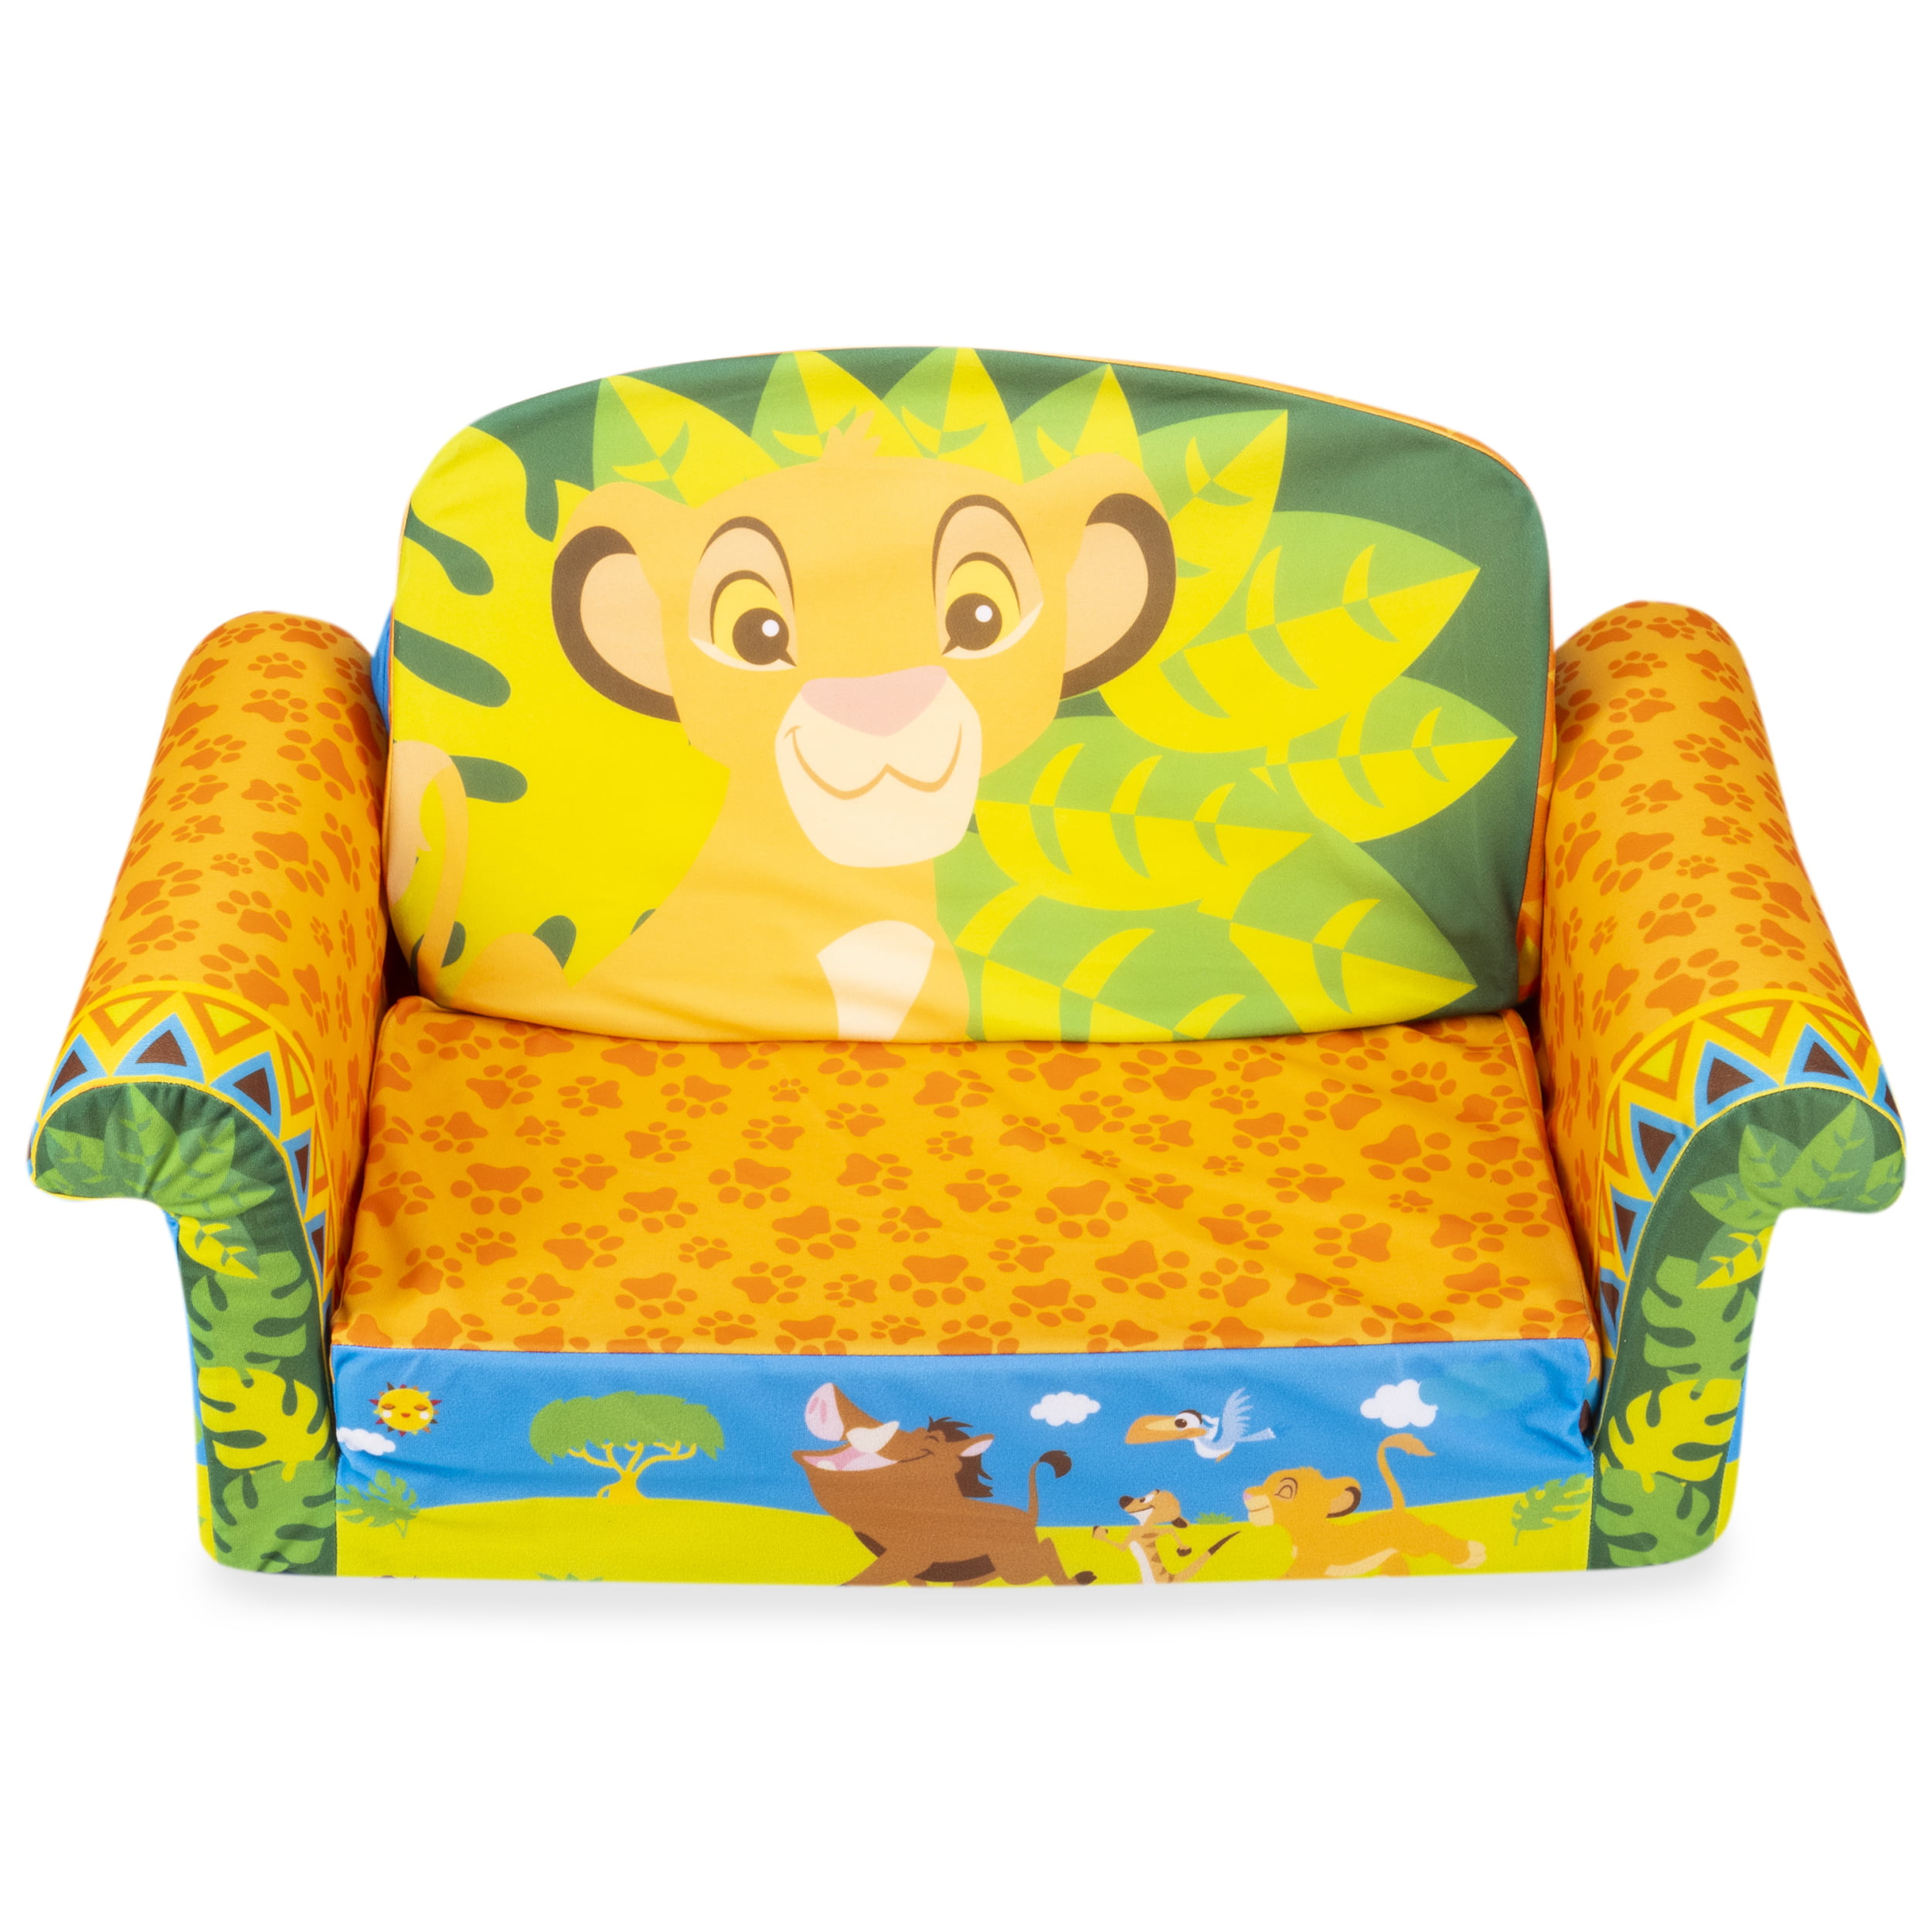 Marshmallow Furniture by Spin Master Childrens 2-in-1 Flip Open Foam Sofa Disney’s The Lion King